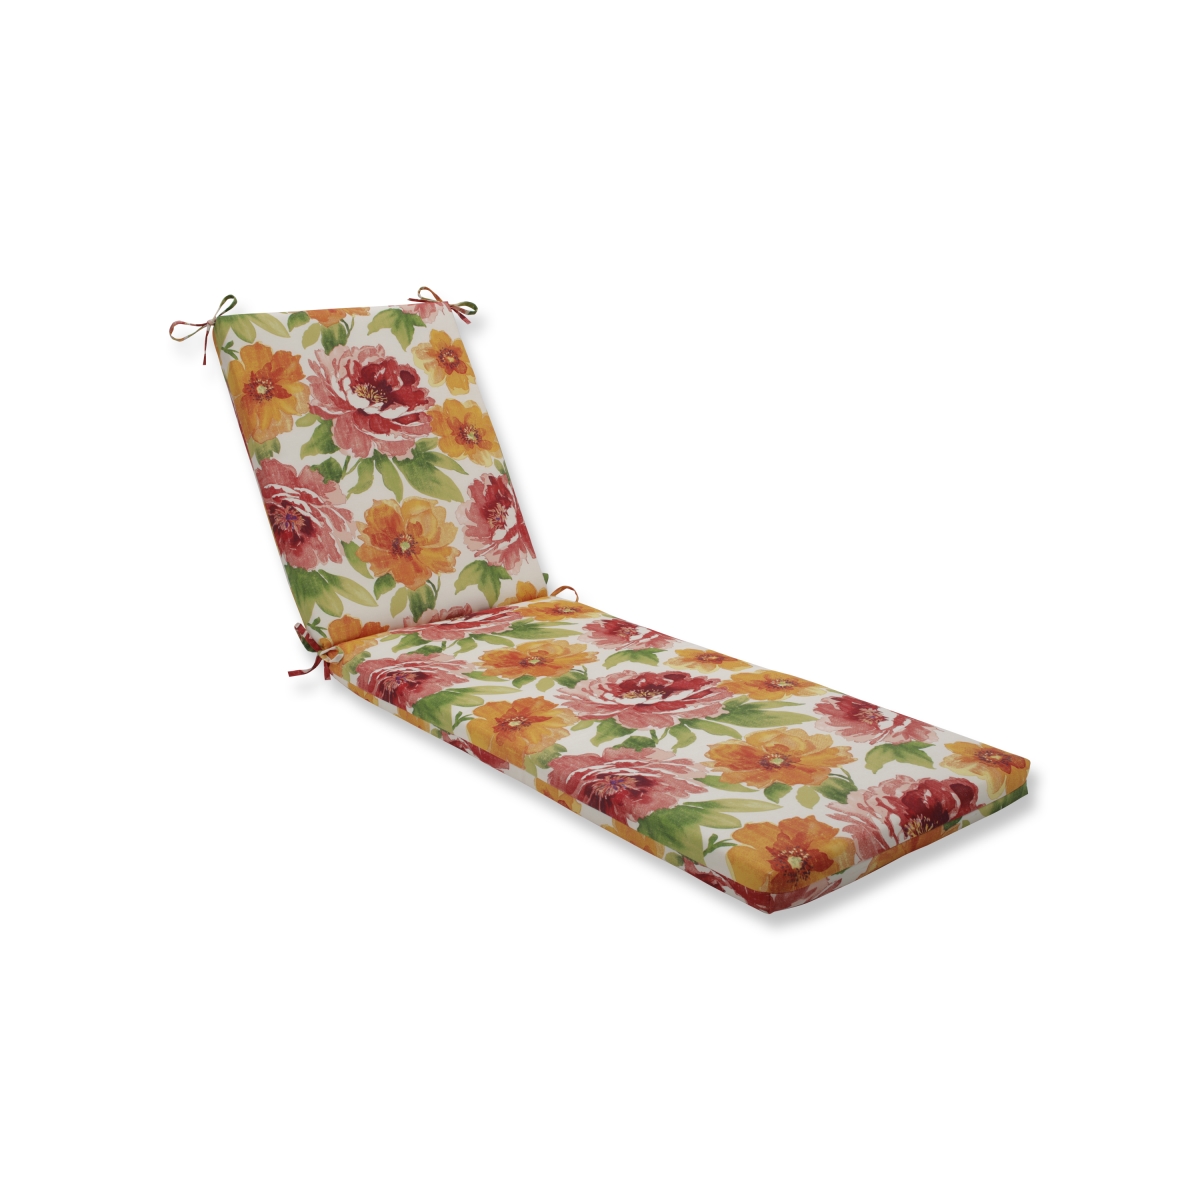 80 X 23 X 3 In. Outdoor & Indoor Muree Primrose Chaise Lounge Cushion, Green